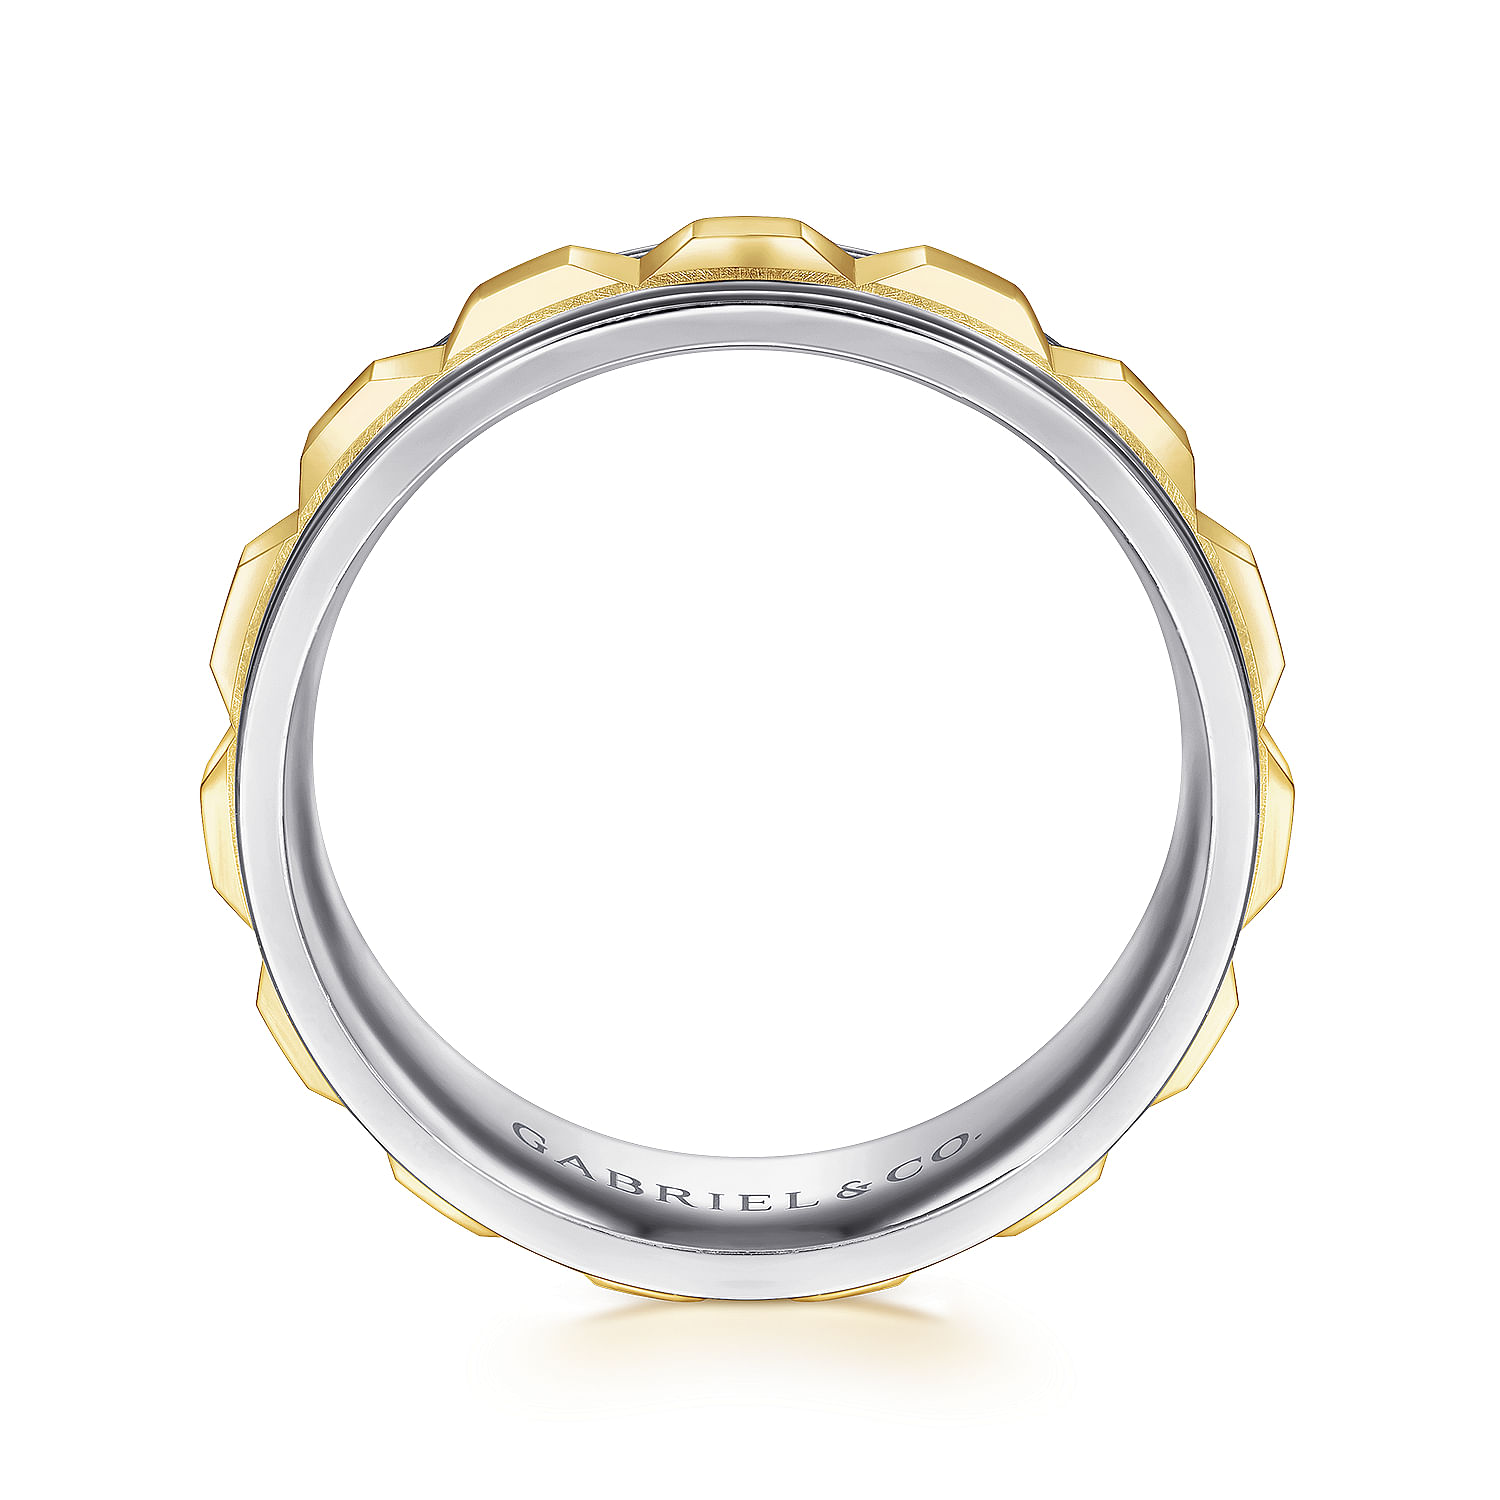 14K White-Yellow Gold 8mm - Grommet Inlay Men's Two Tone Wedding Band